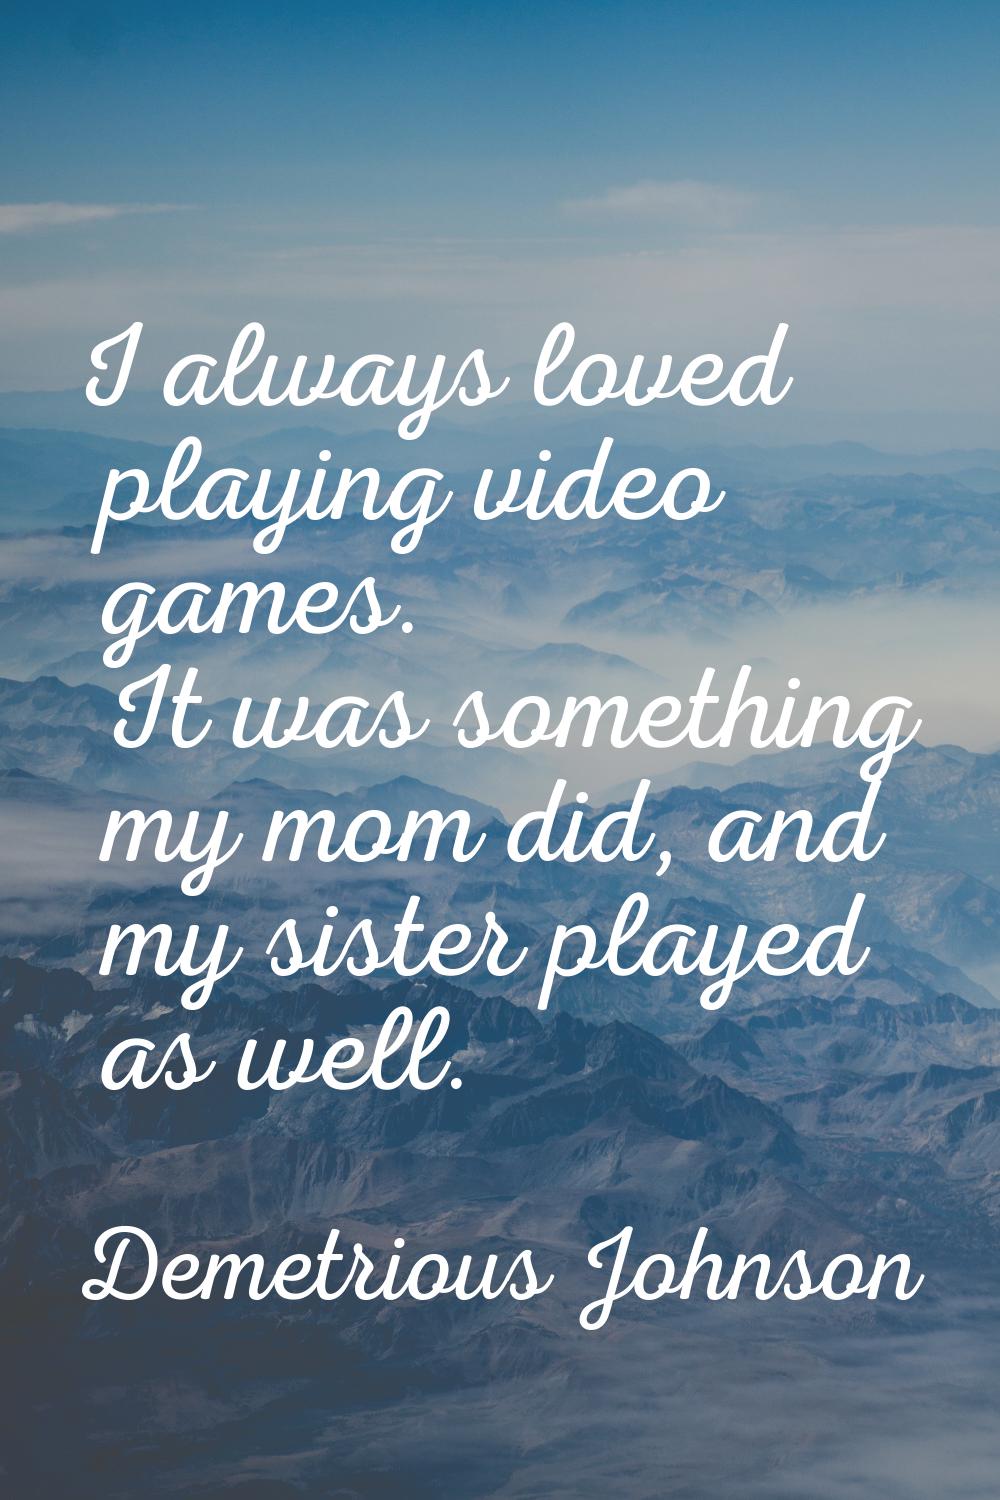 I always loved playing video games. It was something my mom did, and my sister played as well.